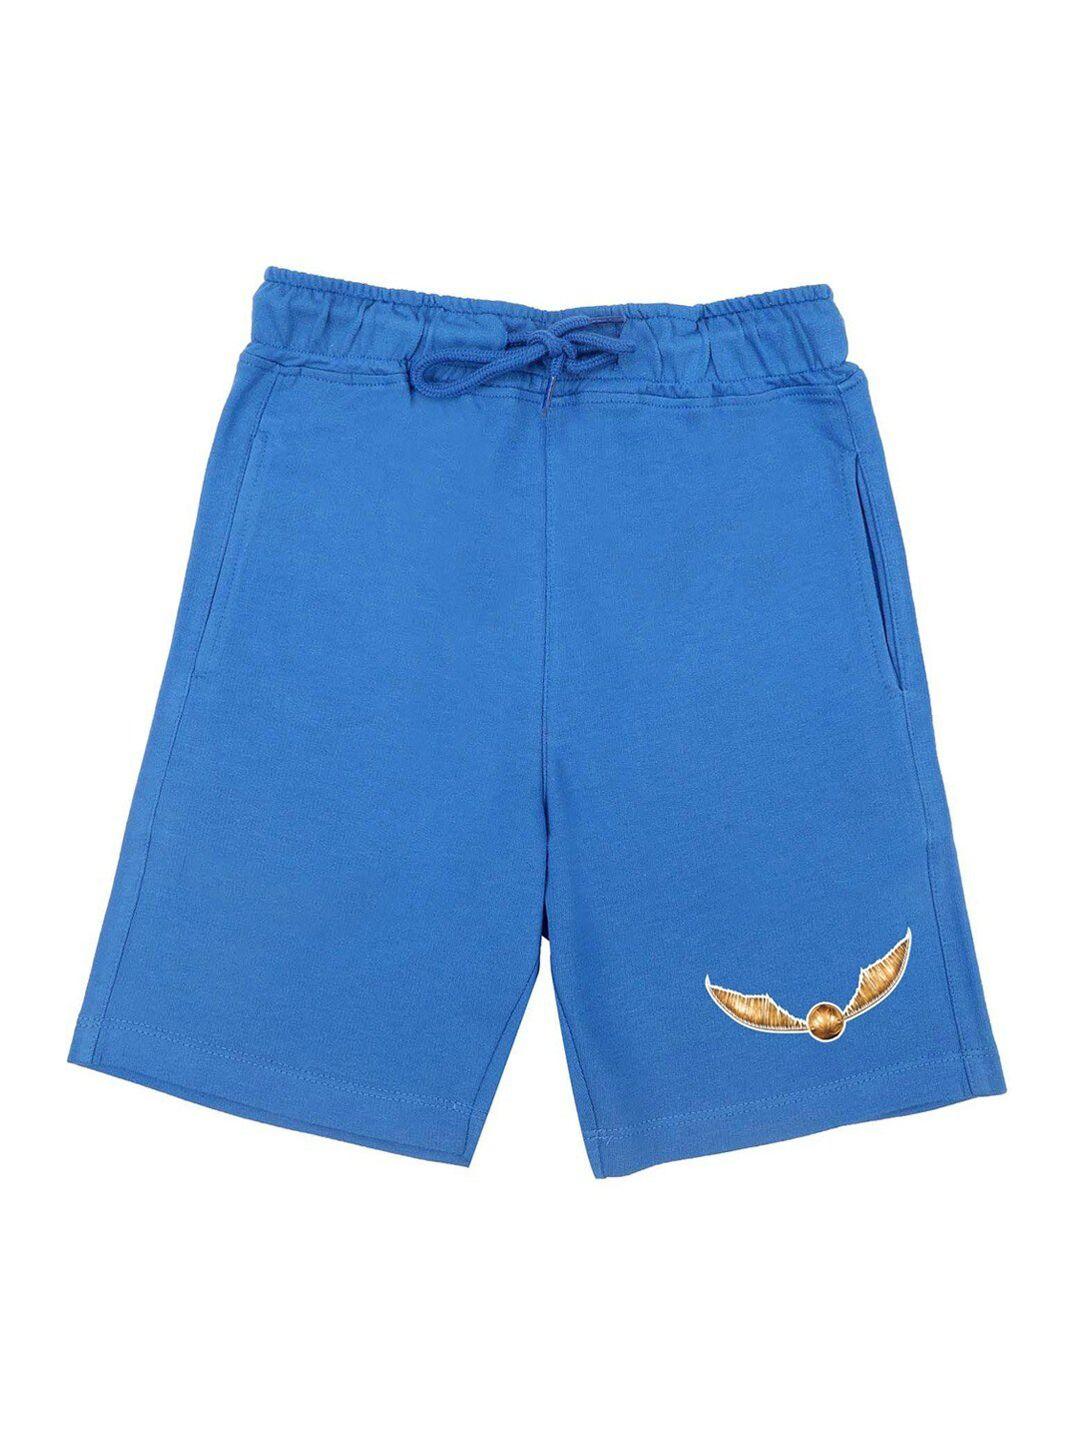 harry potter by wear your mind boys blue harry potter printed shorts